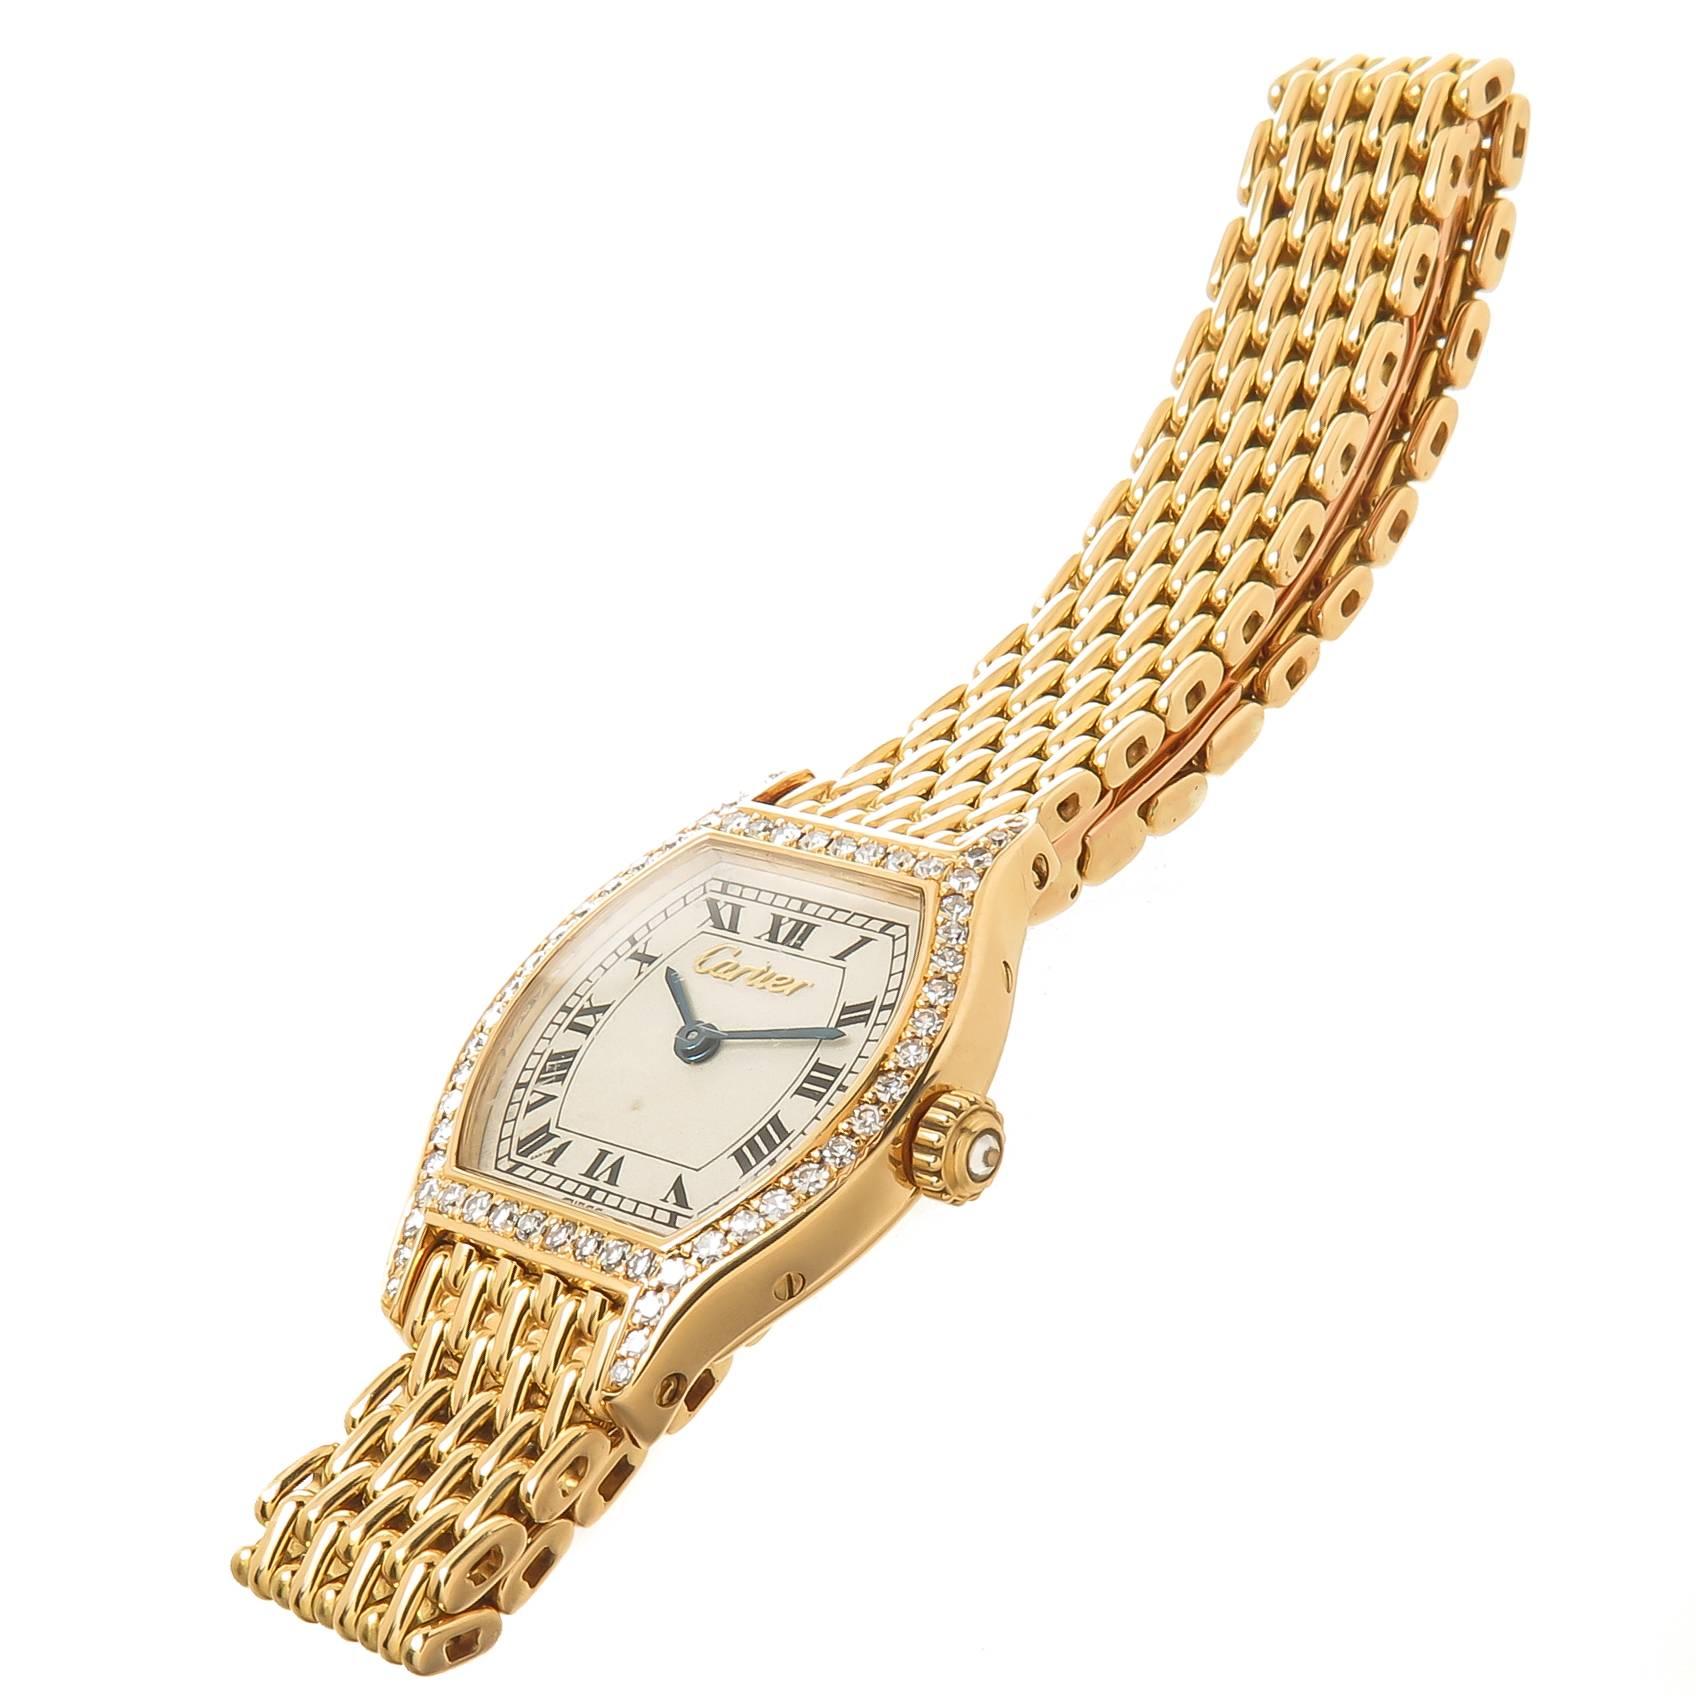 Circa 1990s Cartier Tortue Collection Ladies Wrist watch. 27 X 21 MM 18K yellow Gold Case with Cartier Factory set Diamond Bezel and Crown. Quartz Movement,  White Dial with Raised Gold Cartier logo and Black Roman numerals. 3/8 inch wide 18K Yellow